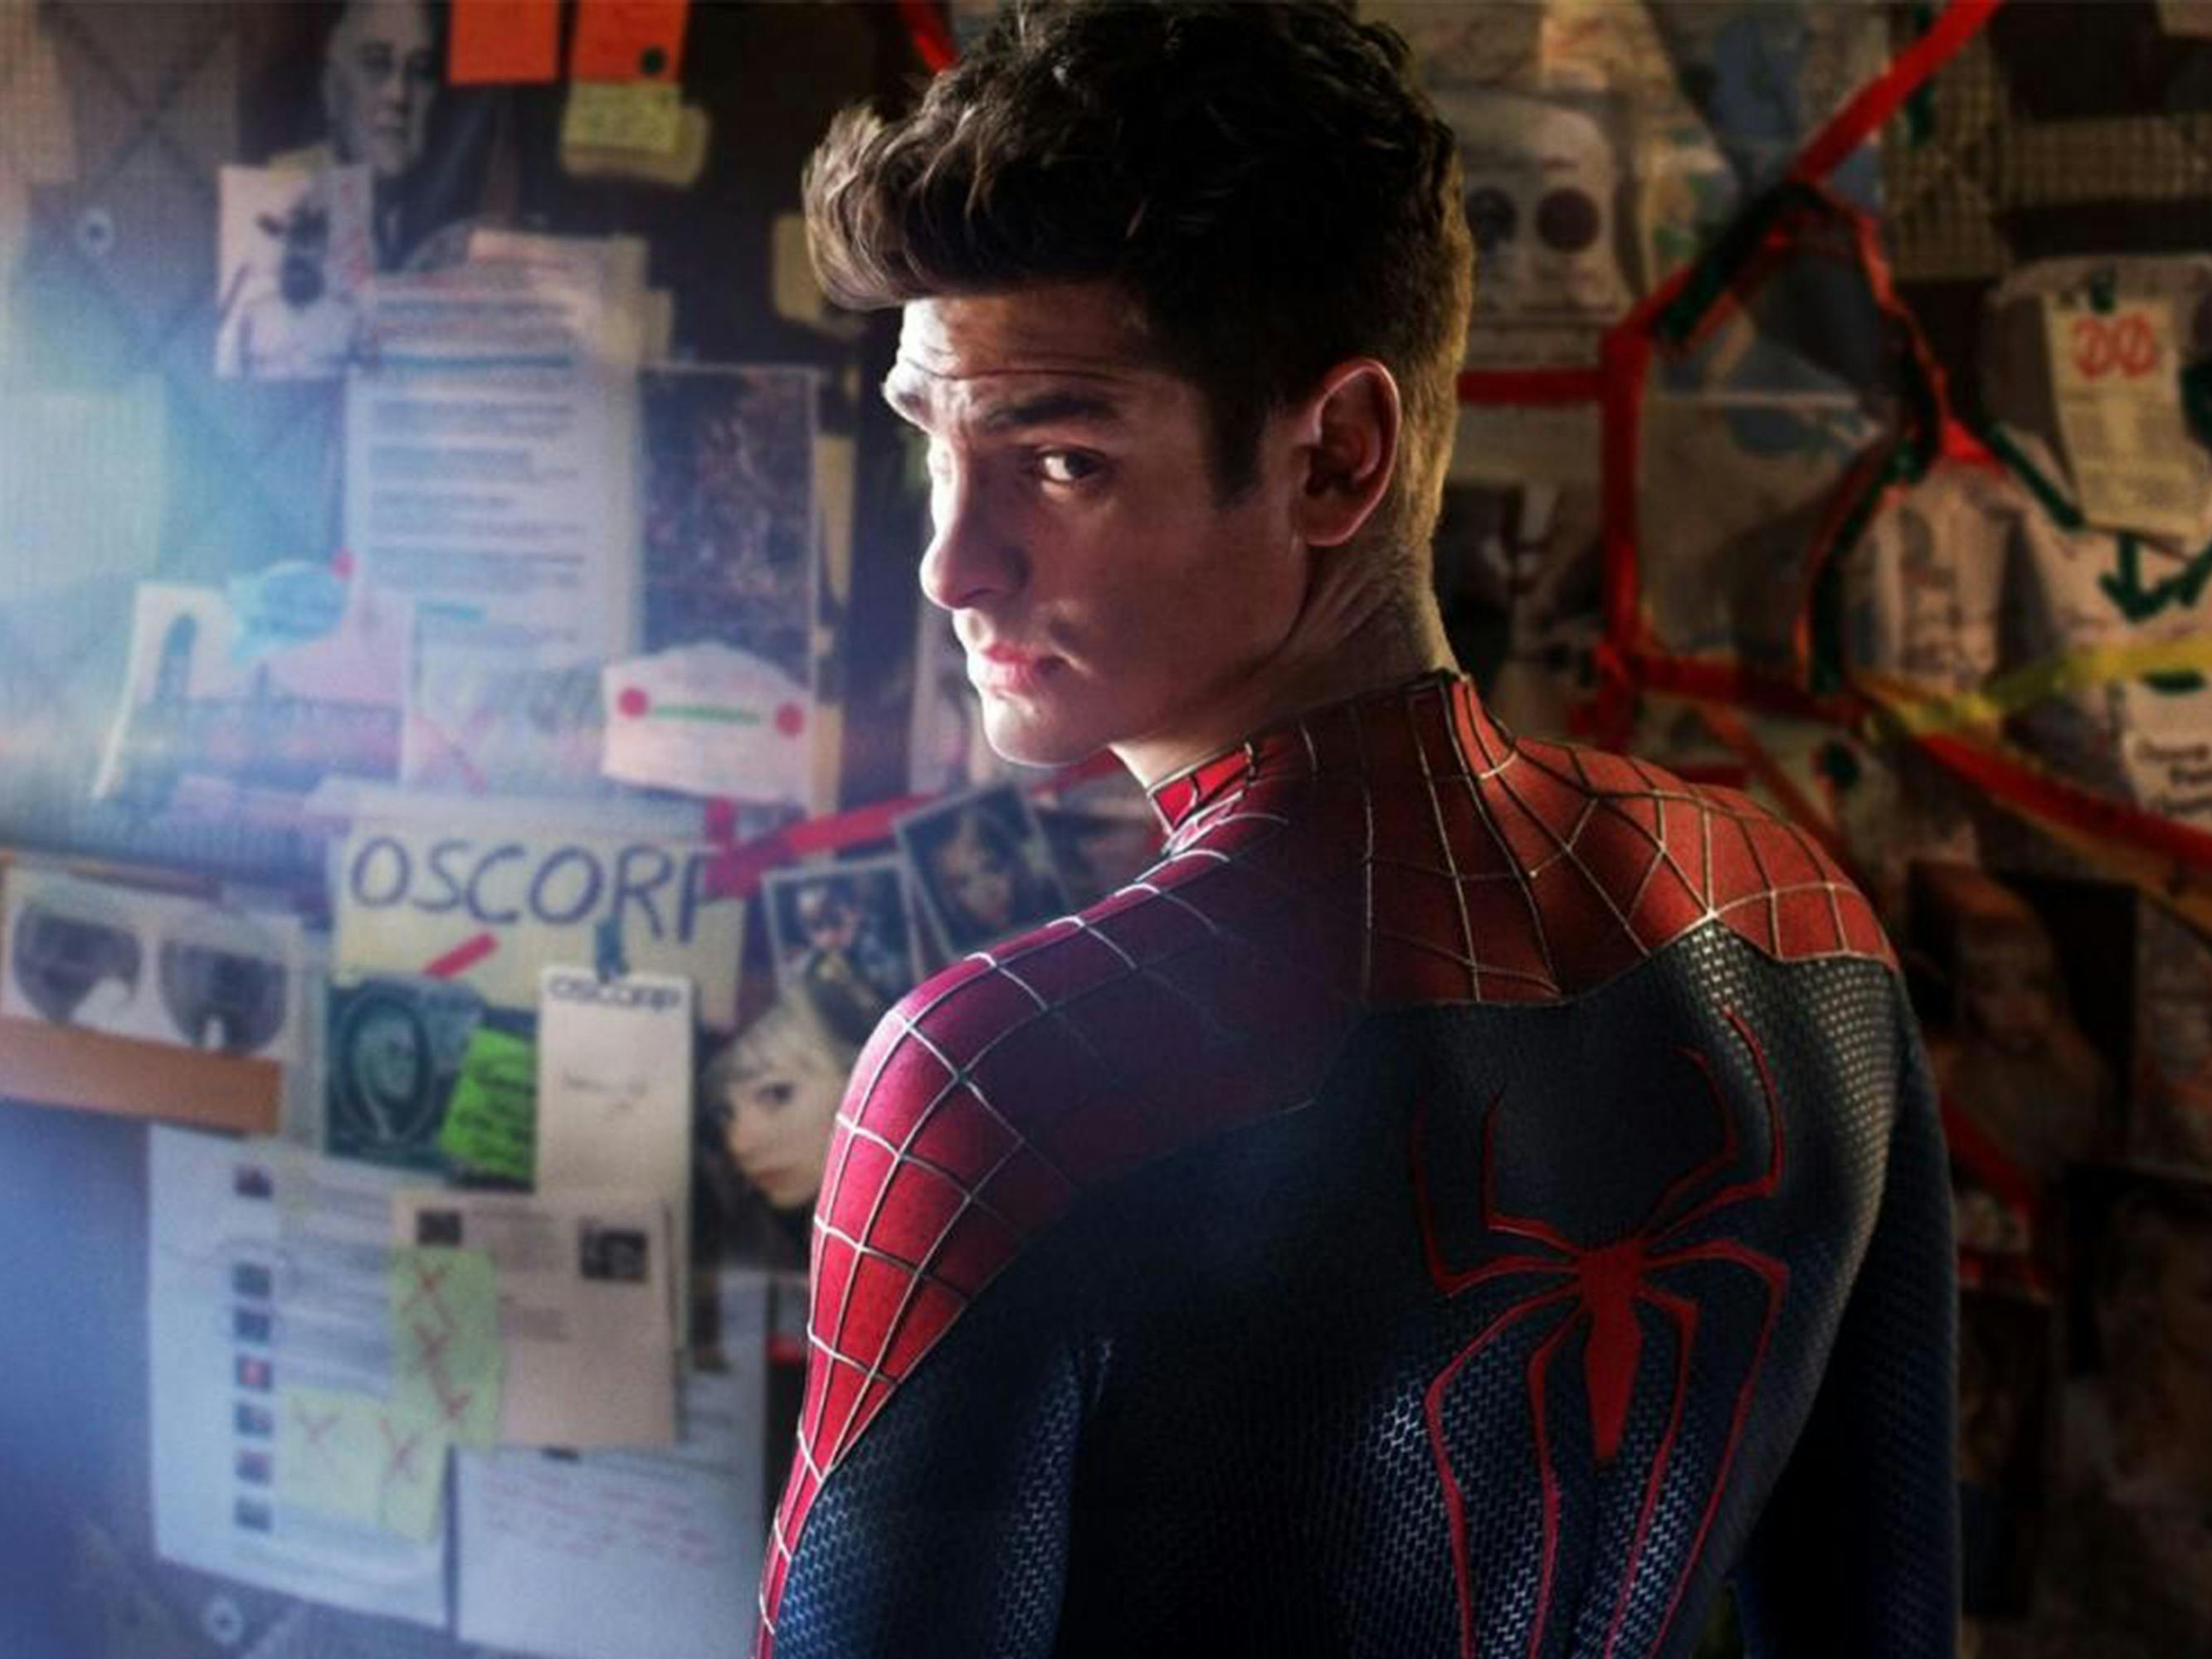 Andrew Garfield wears his spider-man outfit and stands in front of a wall covered with notices.